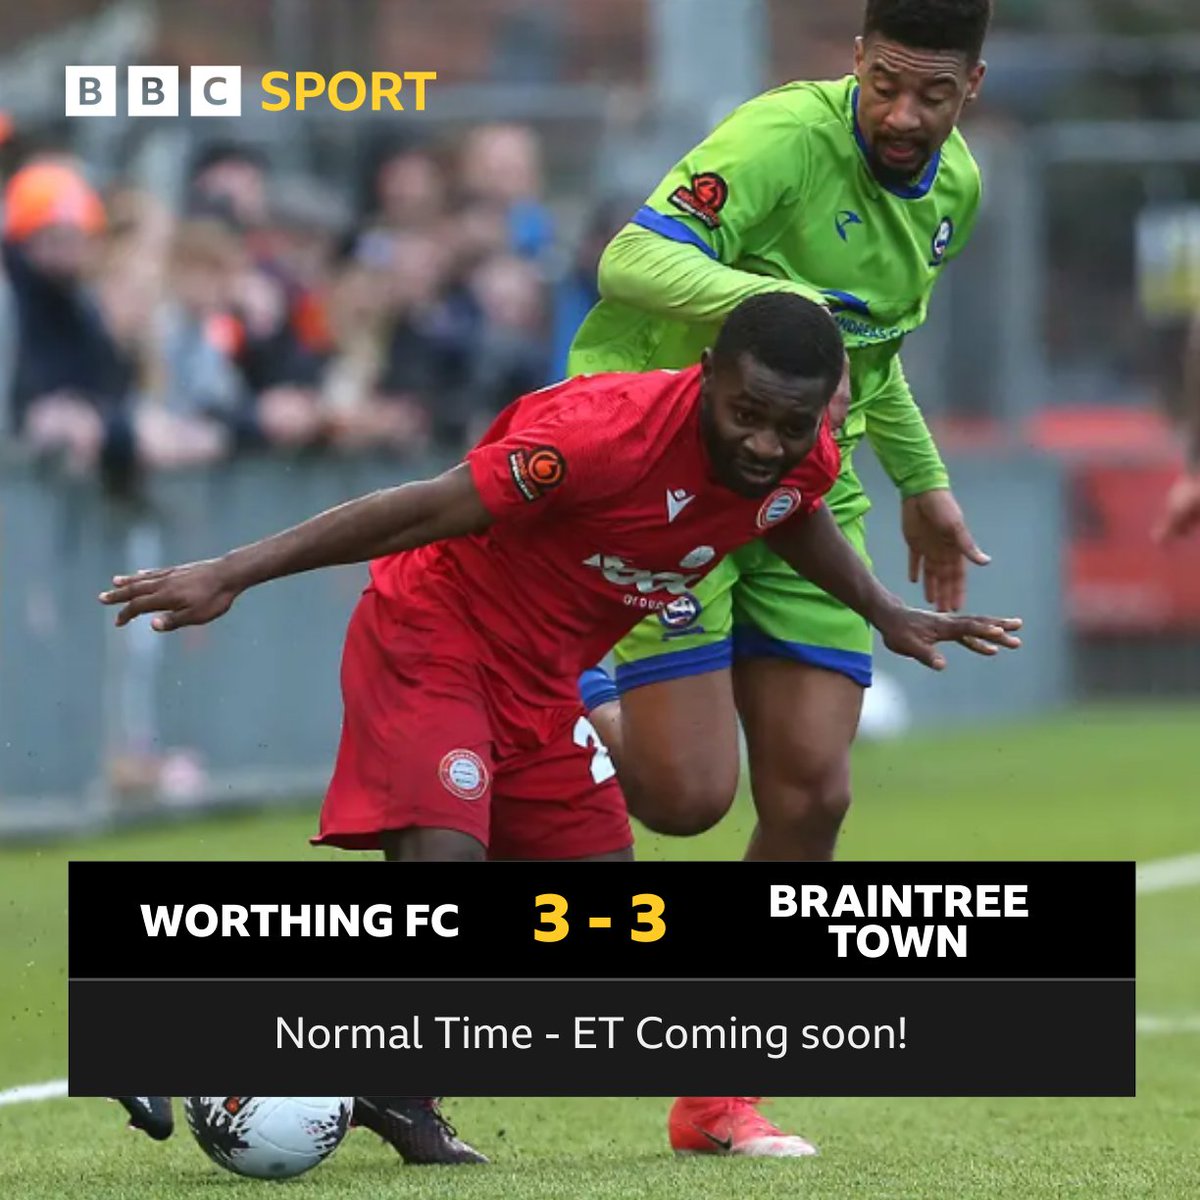 Worthing 3-3 Braintree Town ❤️ The show must go on! The two sides cannot be separated. 😅🤝 Going into extra-time, and maybe even penalties! 🥅 Live updates on @BBCSussex! 📻